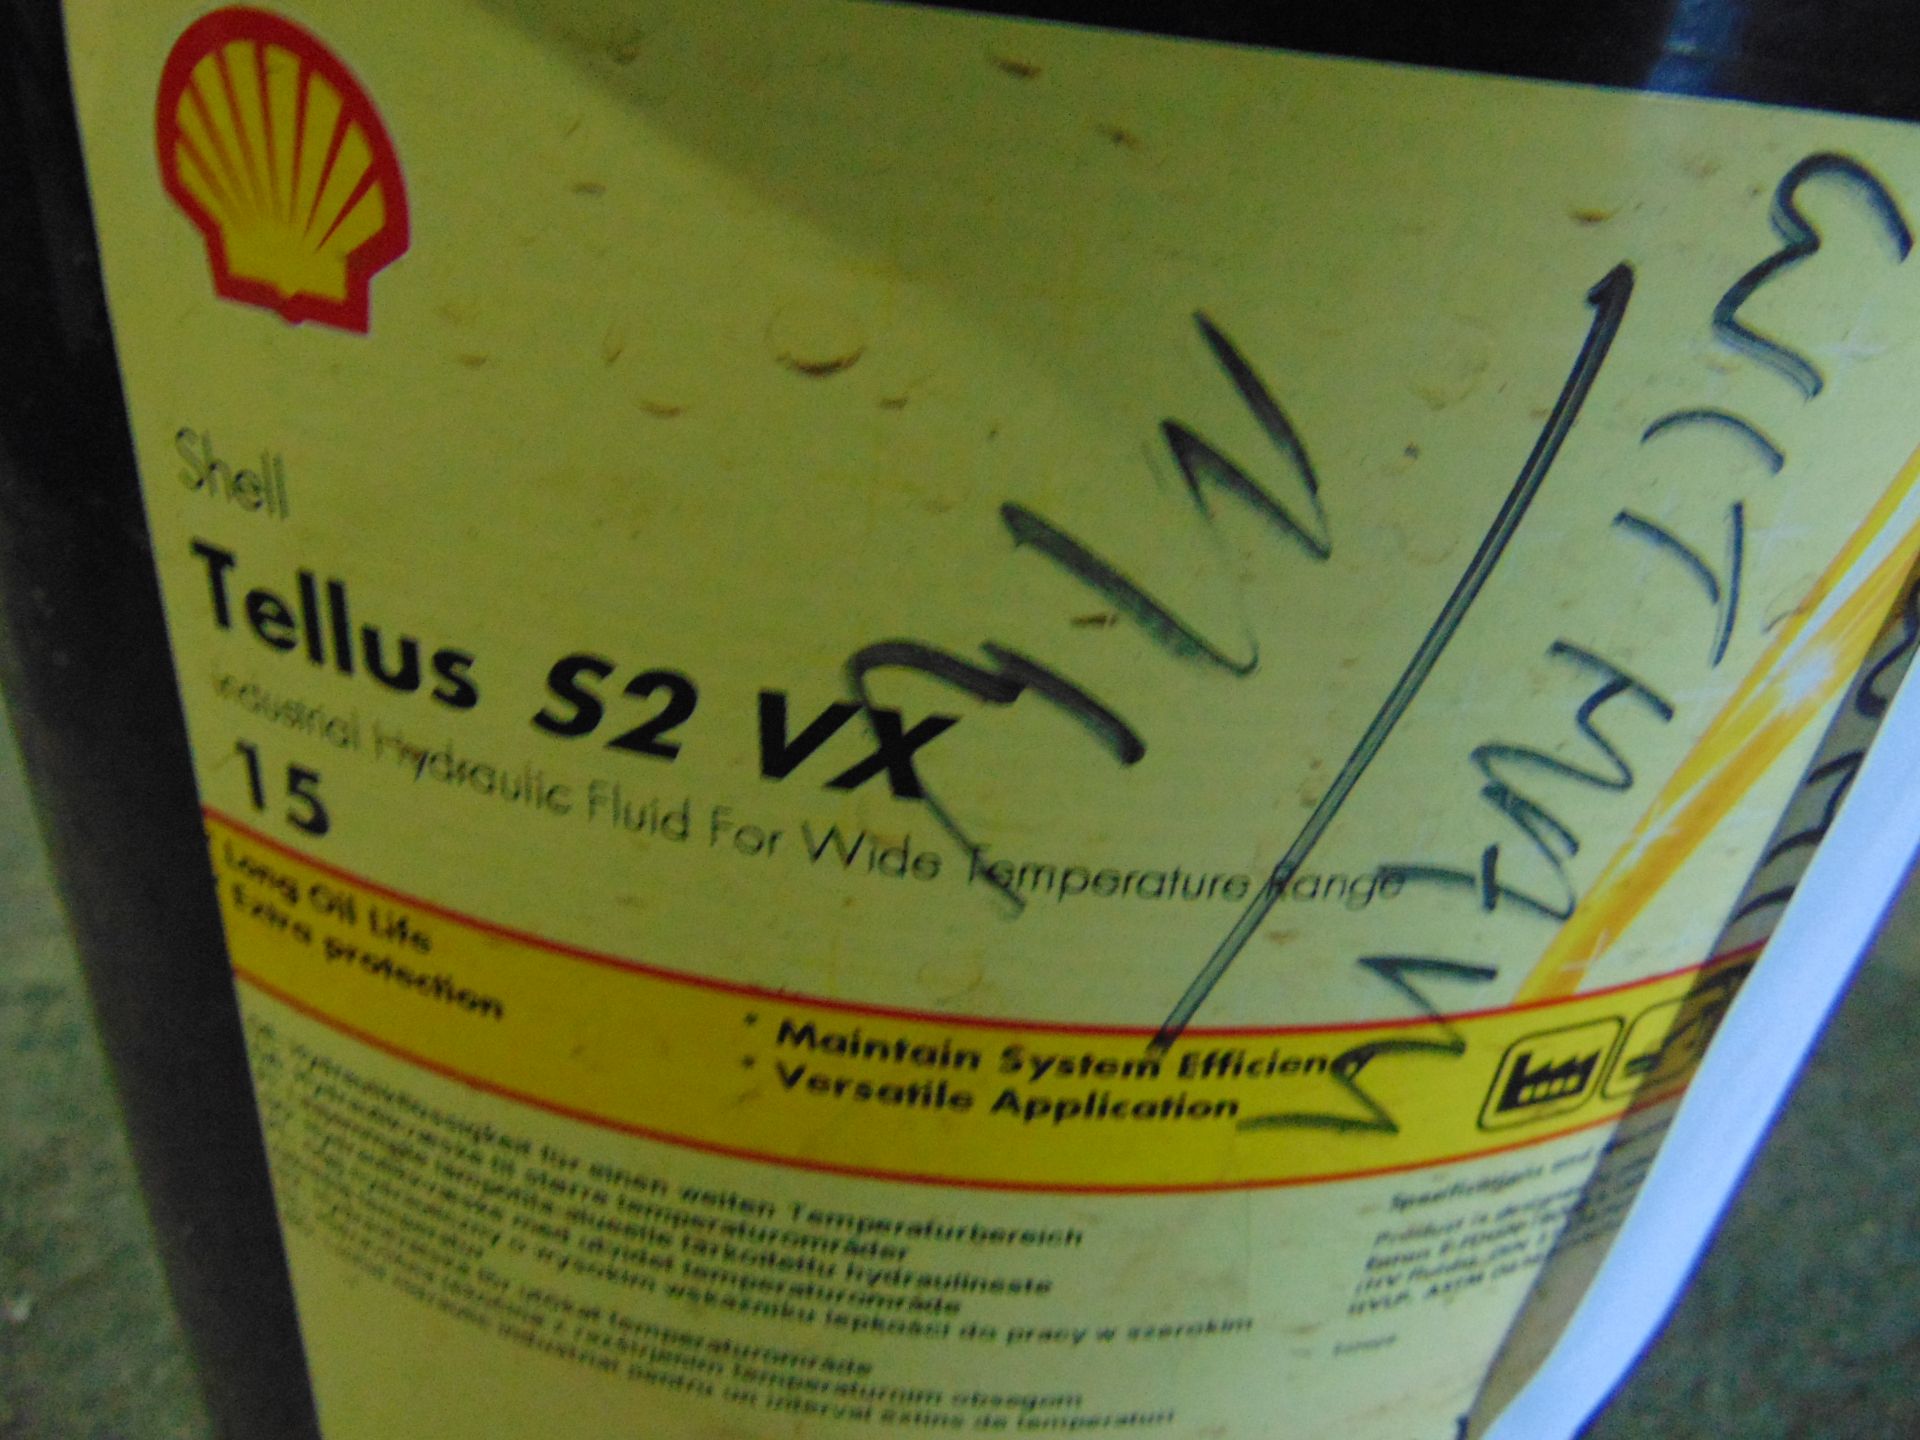 1 x Unissued 20L Sealed Drum of Shell Tellus S2VX Industrial High Performance Hydraulic Oil - Image 3 of 3